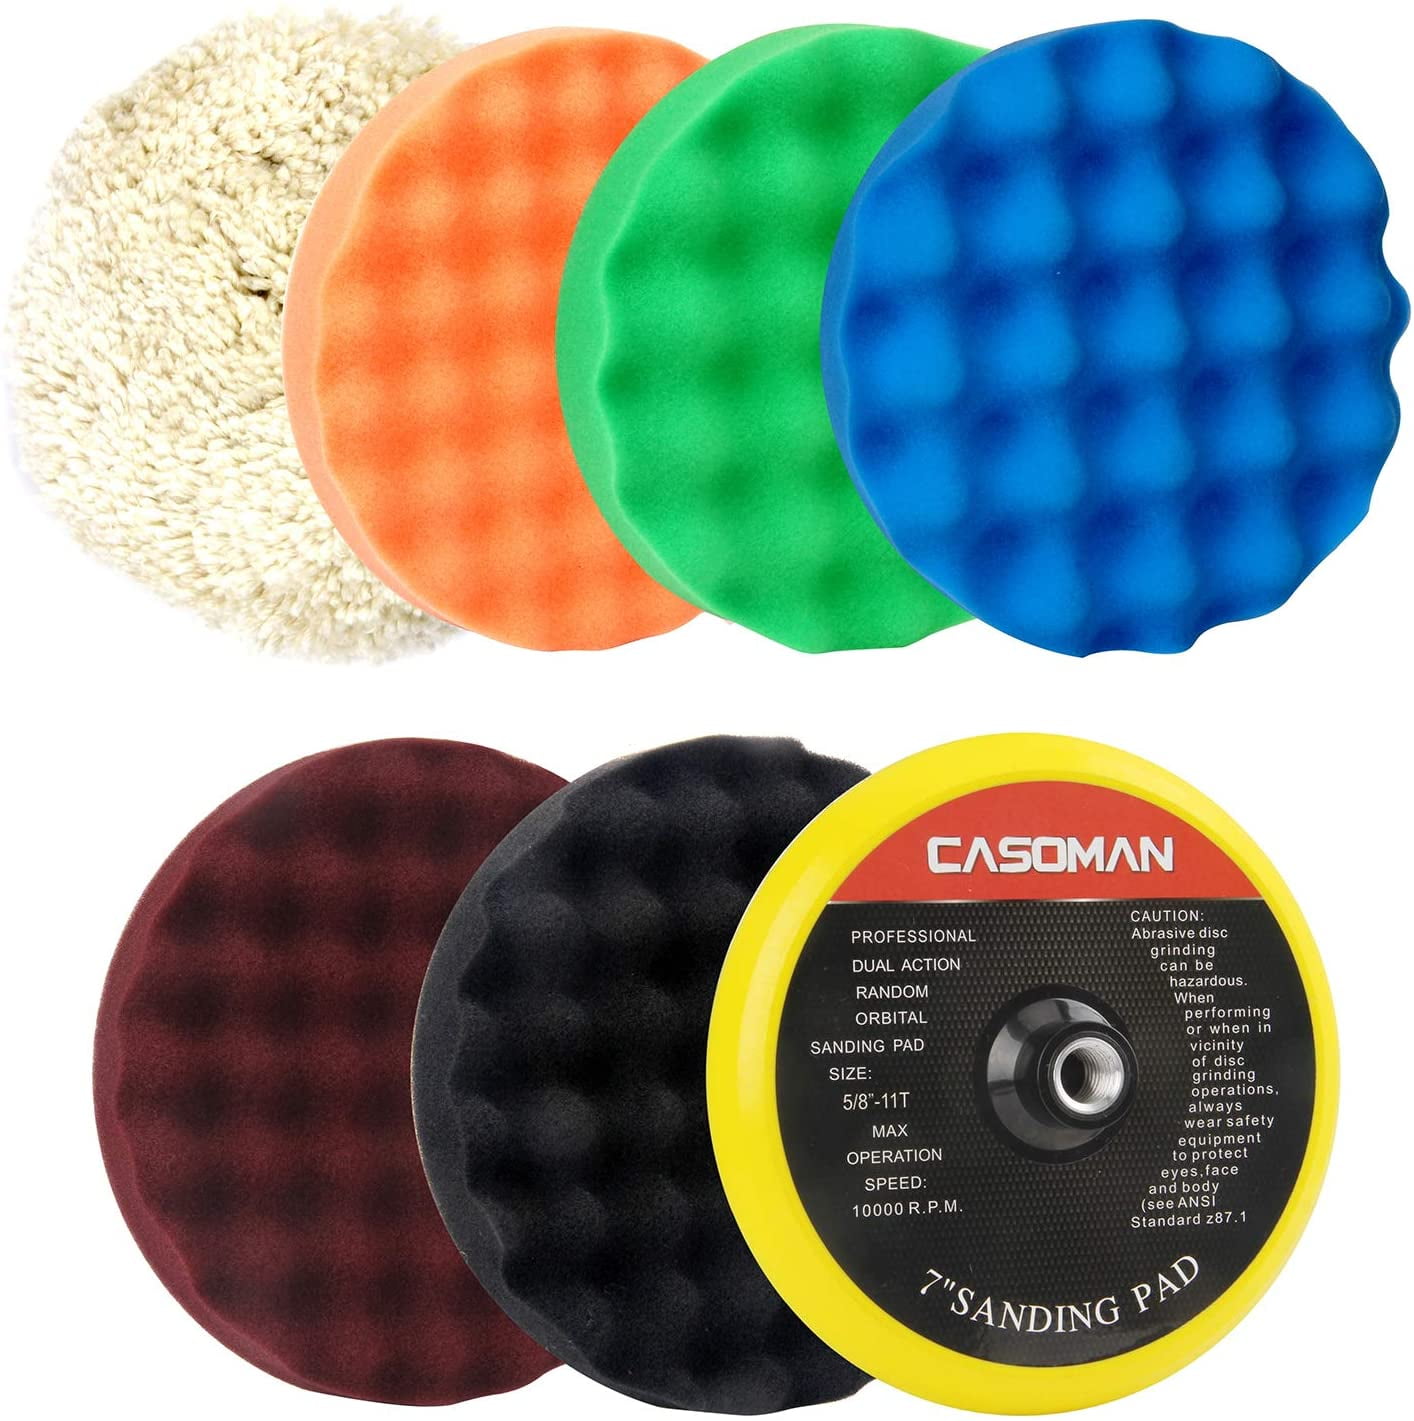 How do you take care of your buffer pads? 🫣 Polishing Pad Cleaner use